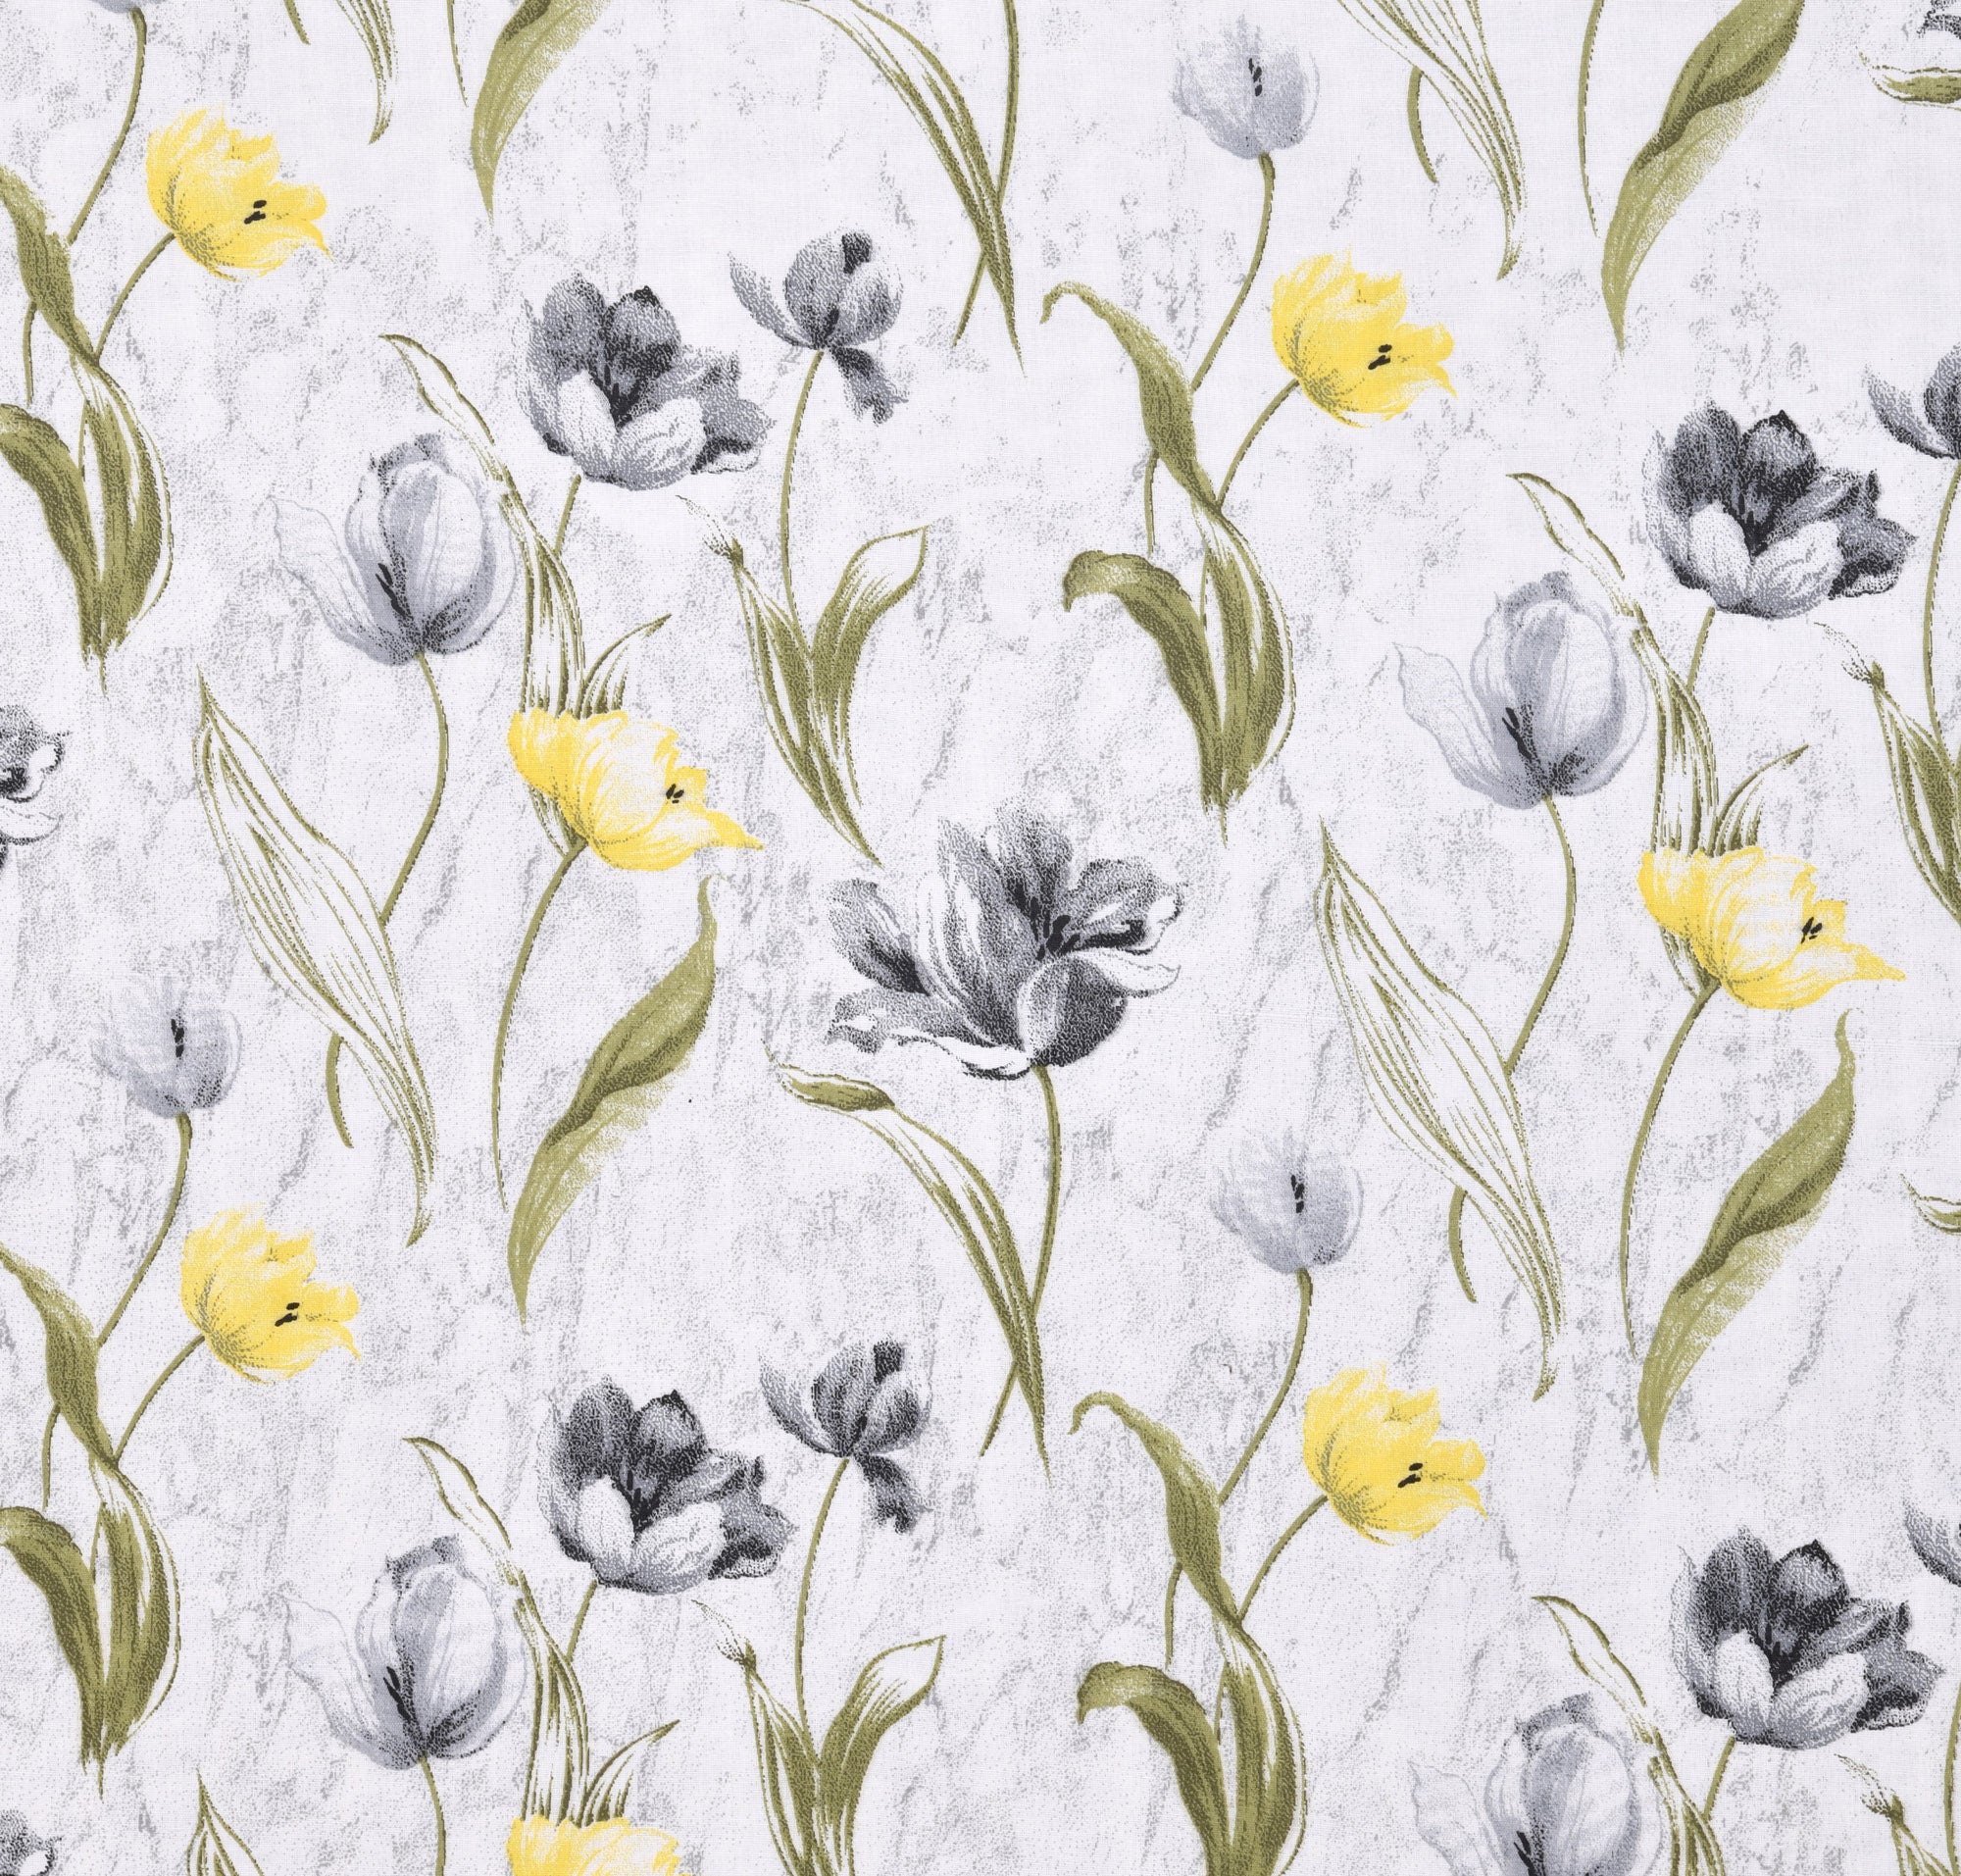 Dohar Cotton-Double Bed- Gray Tulips